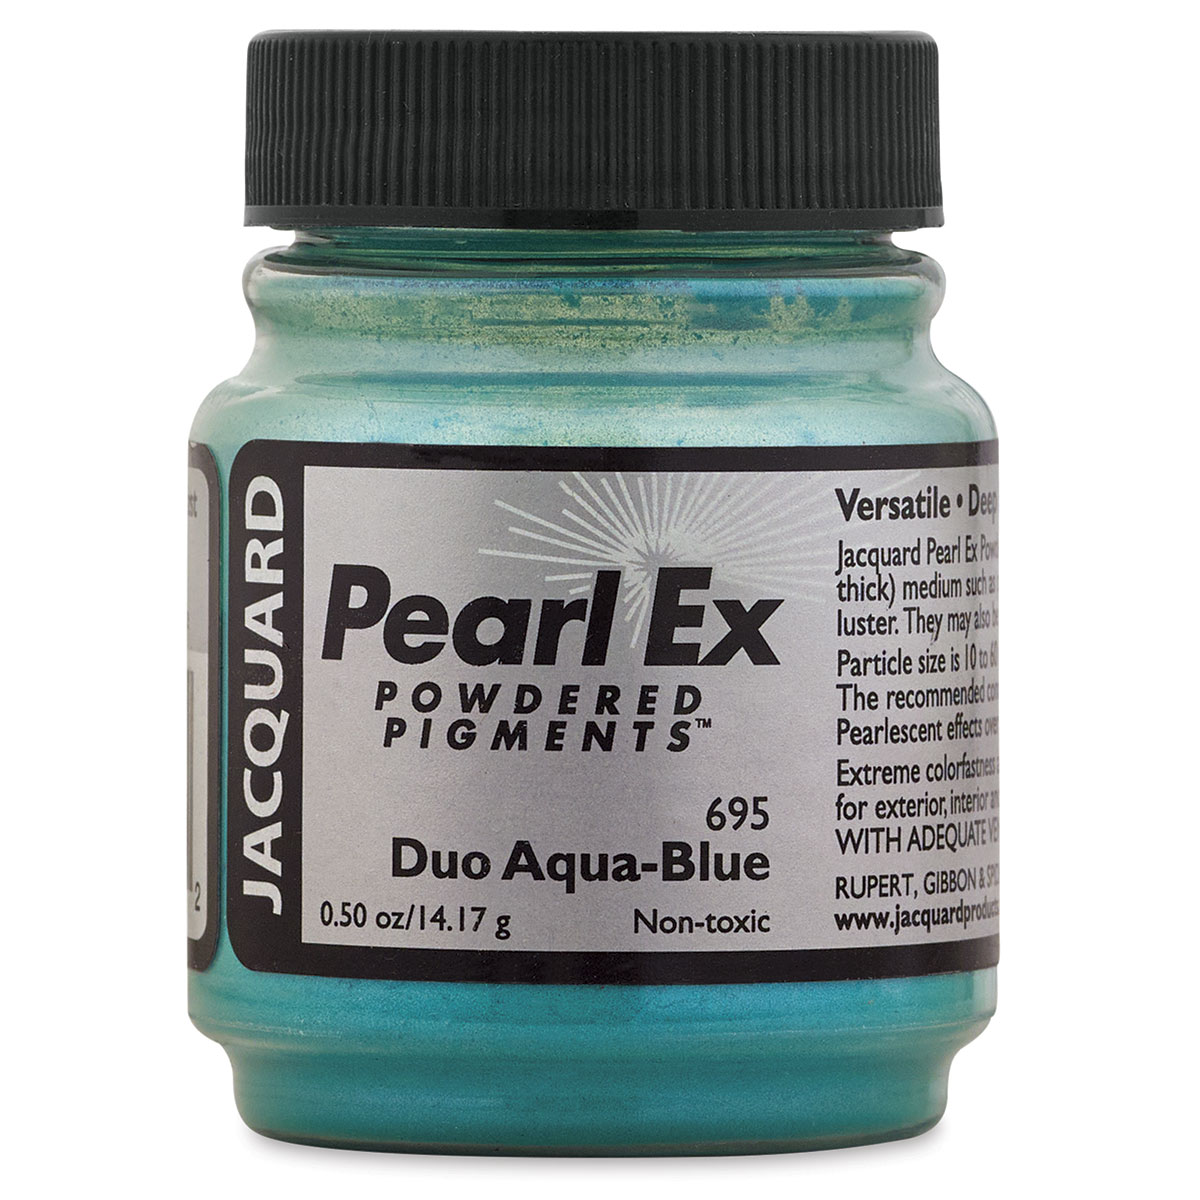 Jacquard Pearl EX Powdered Pigments Sky Blue 0 75 oz Pack of 3